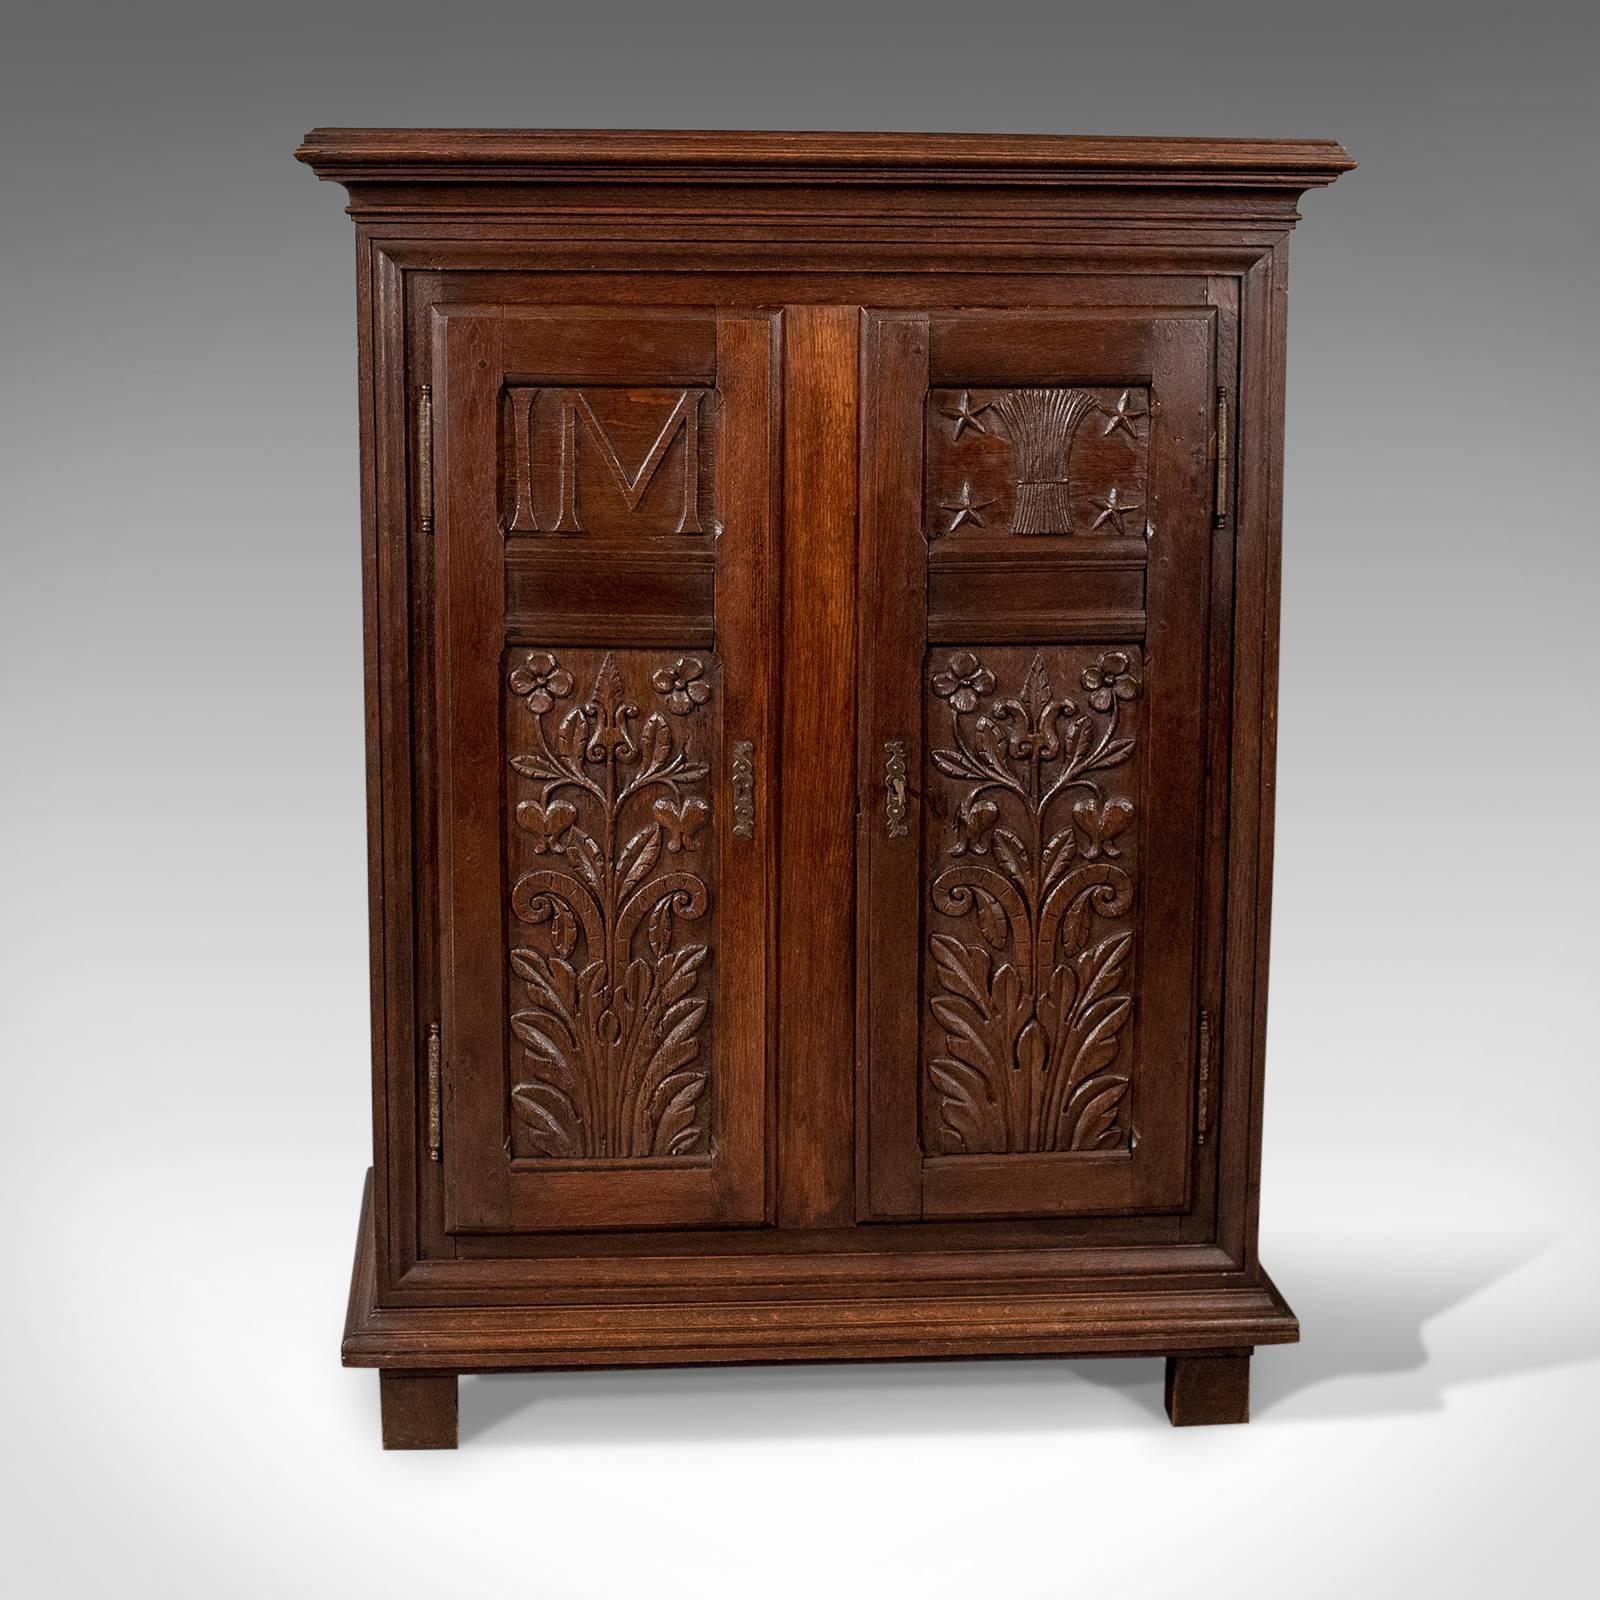 This is a French antique side cabinet from the late 19th century, an oak cupboard, circa 1900.

Attractive color to the oak with an appealing aged patina
Classic Provincial craftsmanship with generous oak stock 
Rising from stout square section